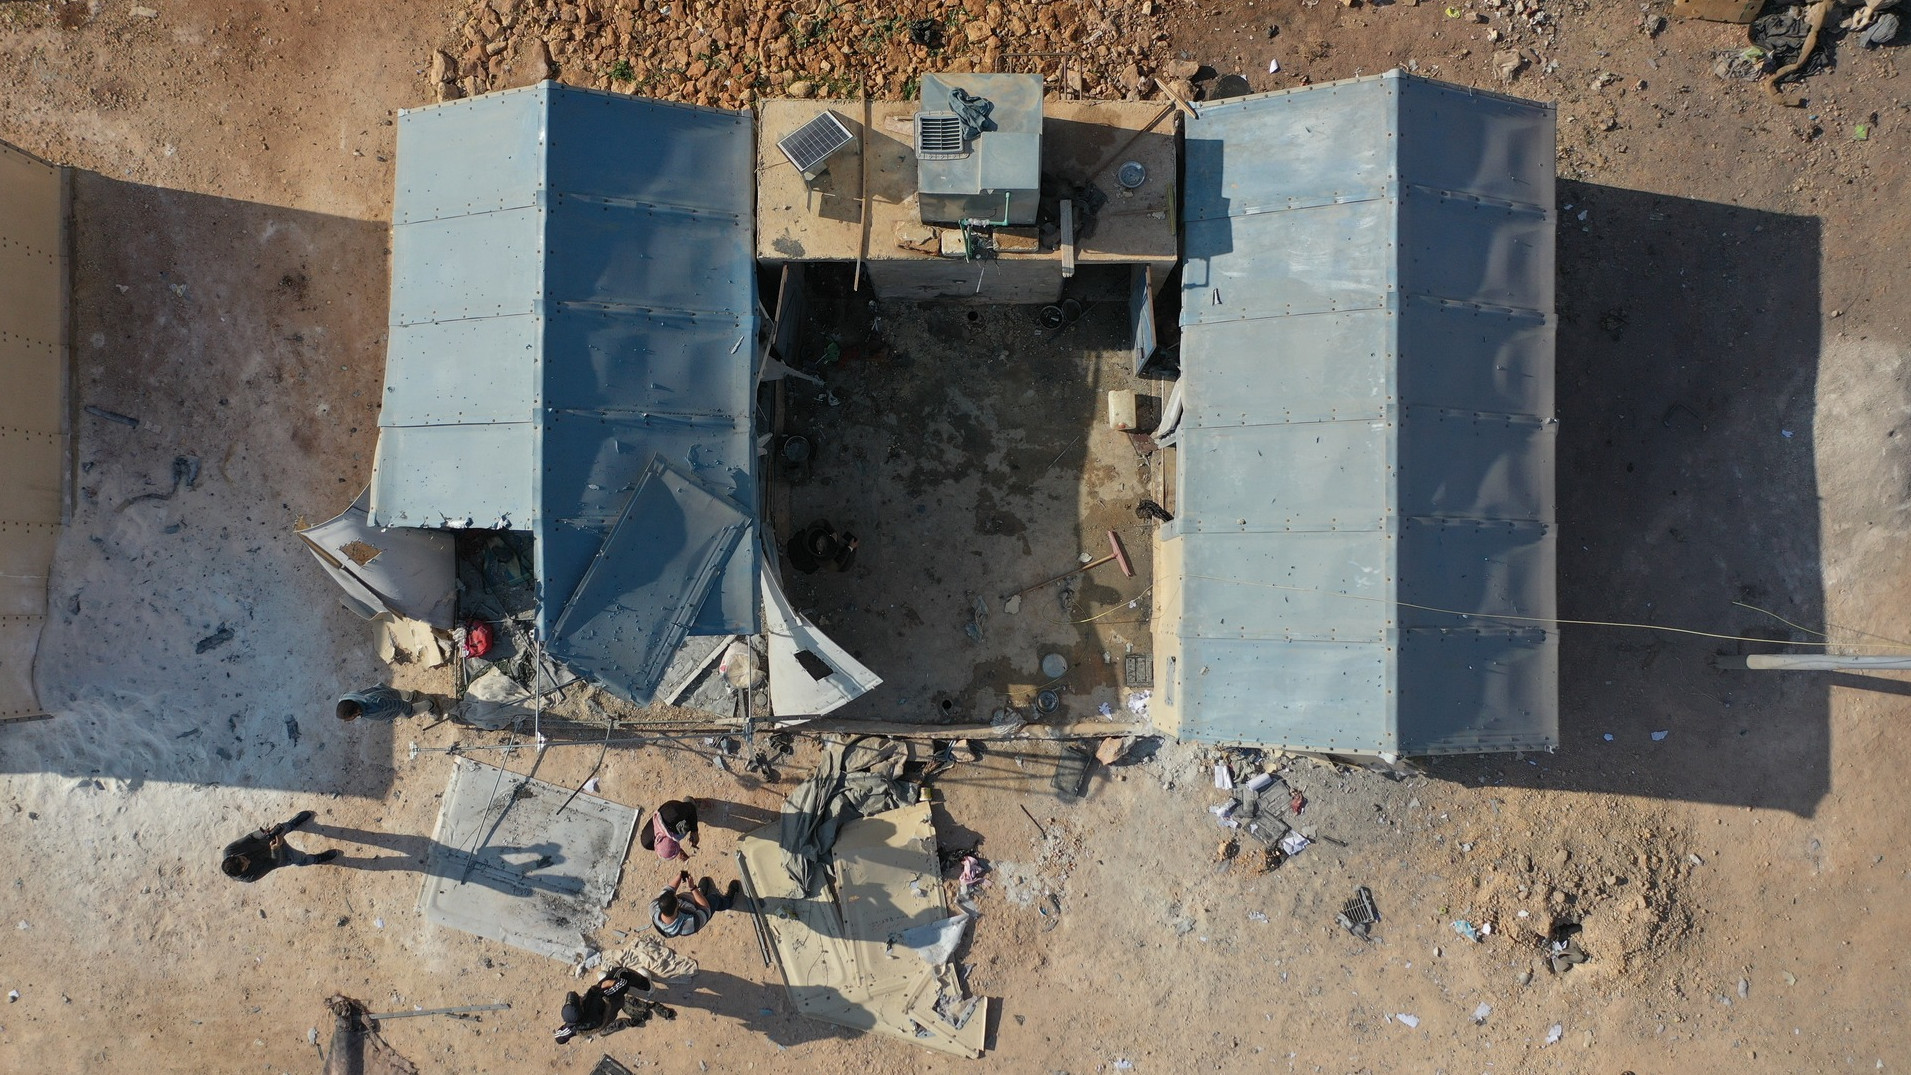 An aerial photo showing a tent damaged by government bombing on 6 November 2022 near the village of Kafr Jalis in the rebel-held Idlib province in northwestern Syria (Syrian Civil Defence)